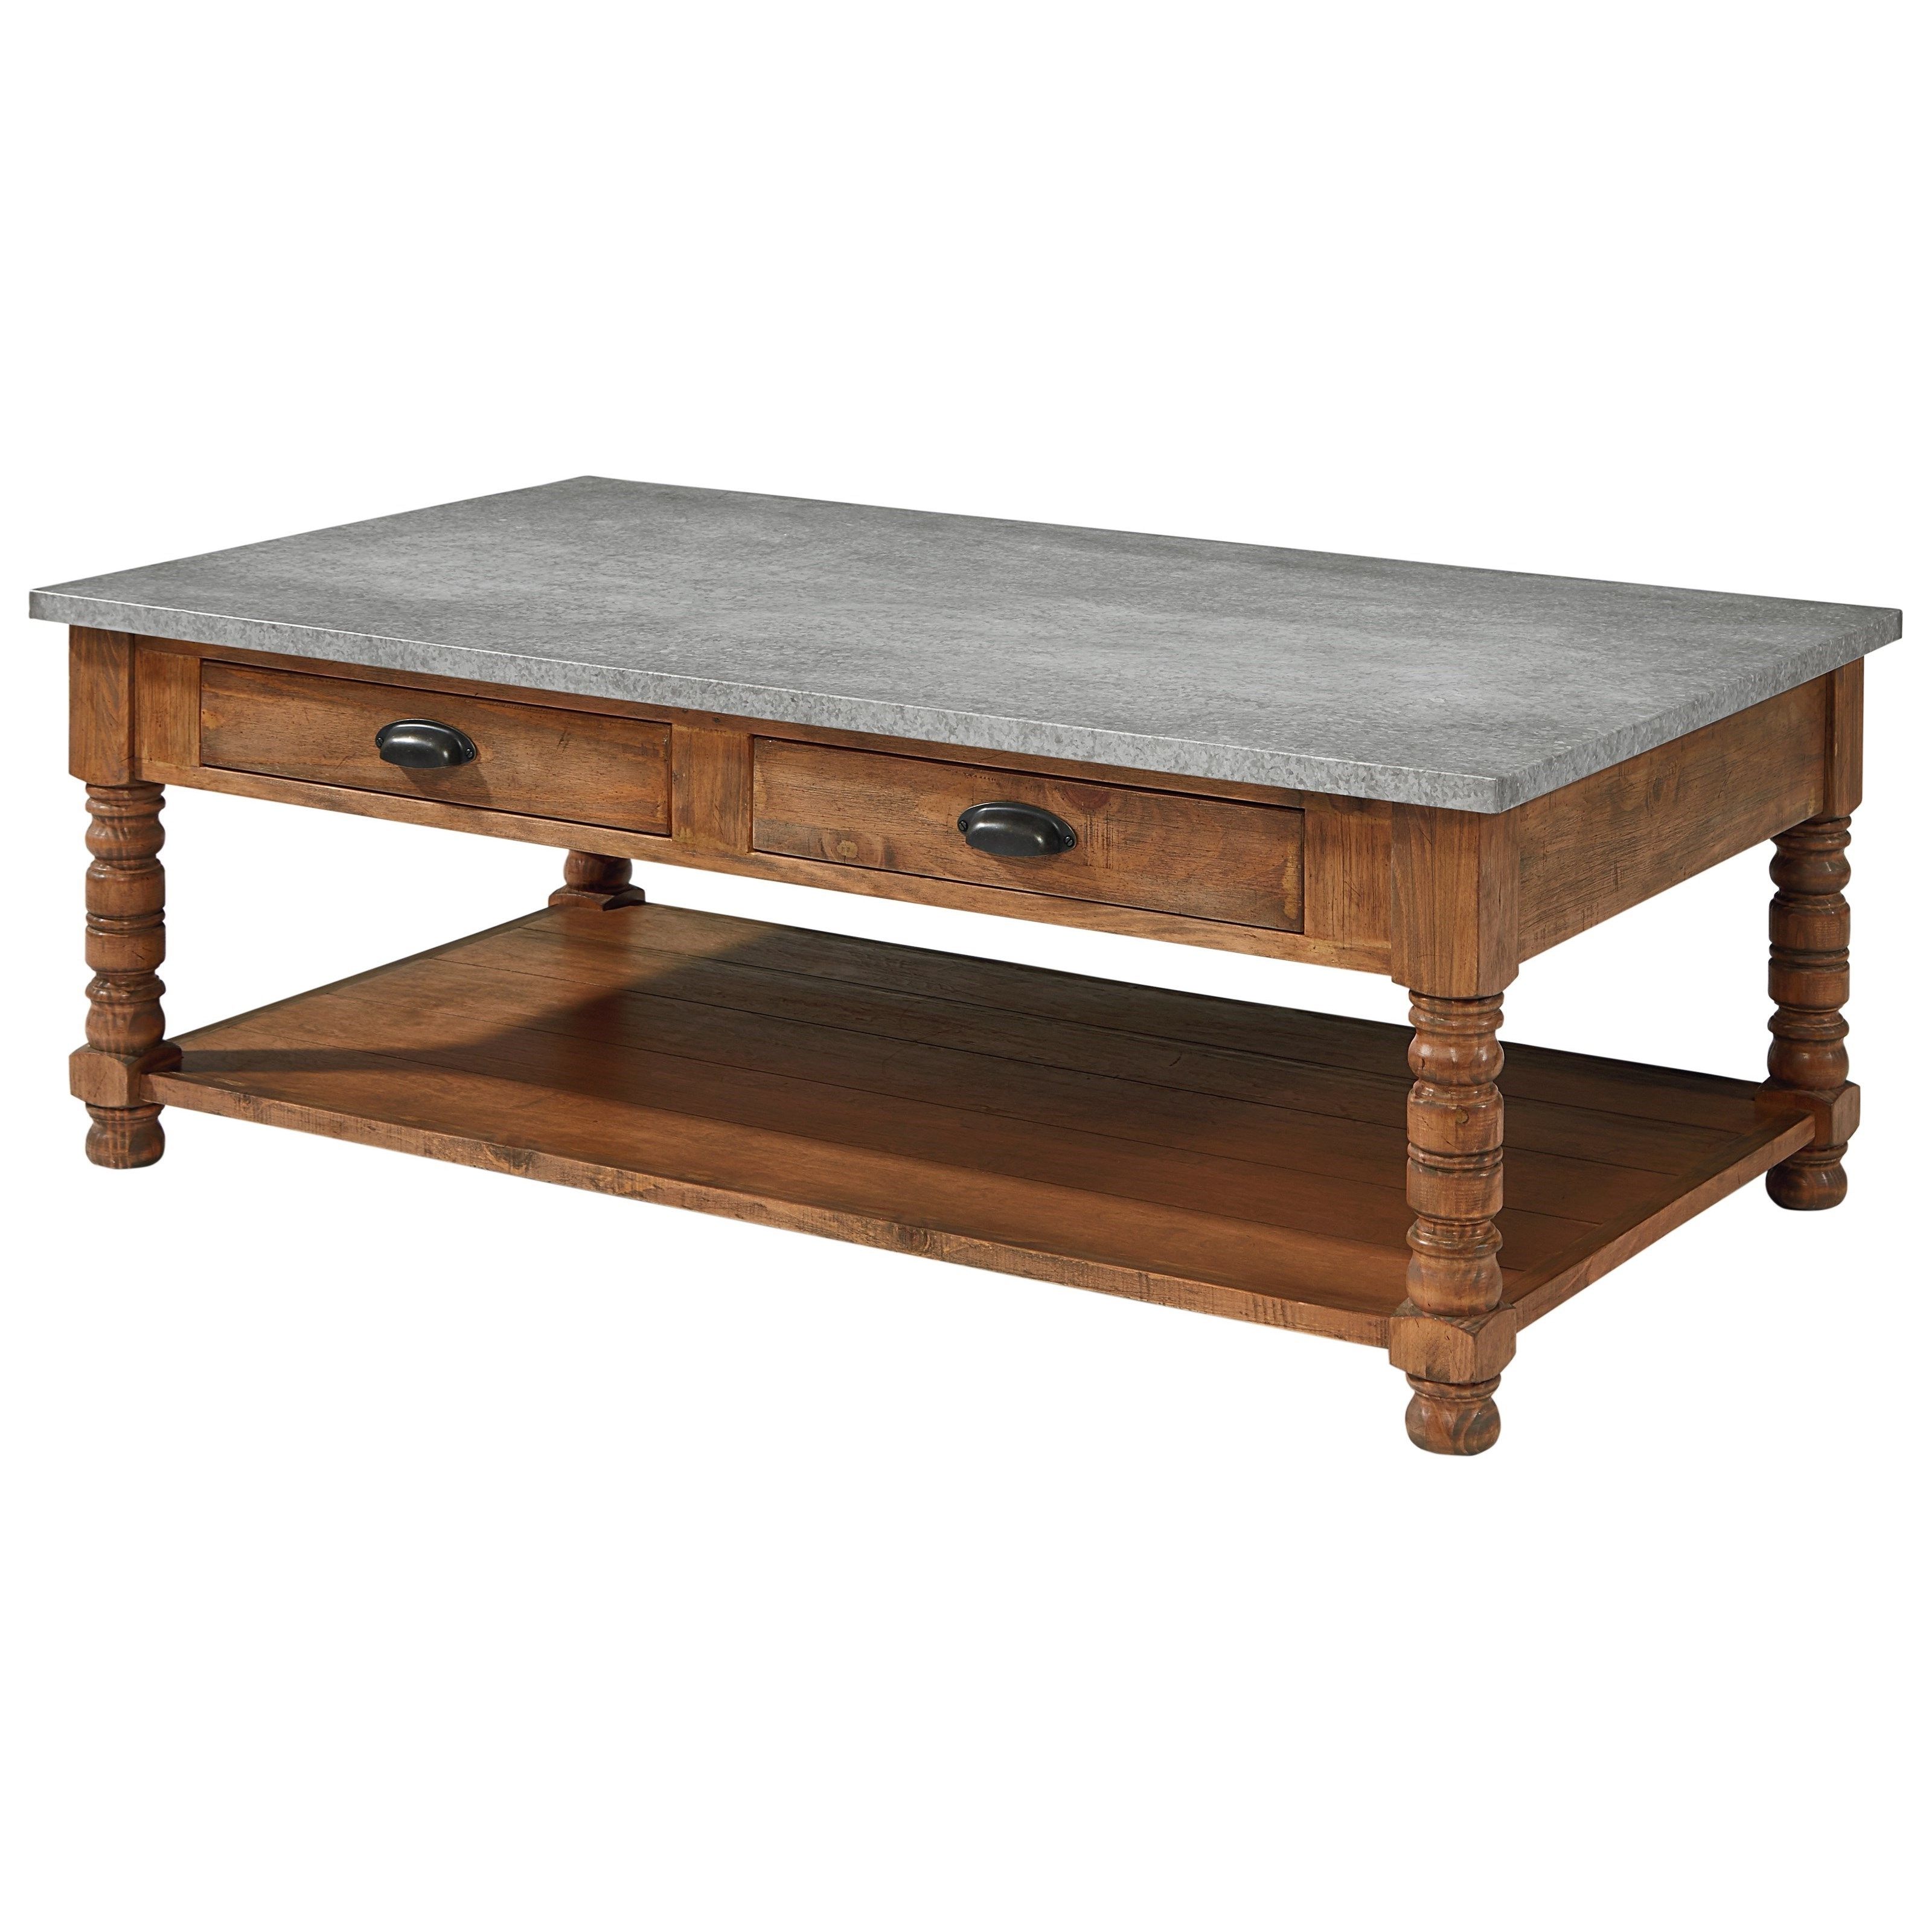 2017 Magnolia Home Top Tier Round Dining Tables With Magnolia Homejoanna Gaines Primitive Bobbin Coffee Table (View 23 of 25)